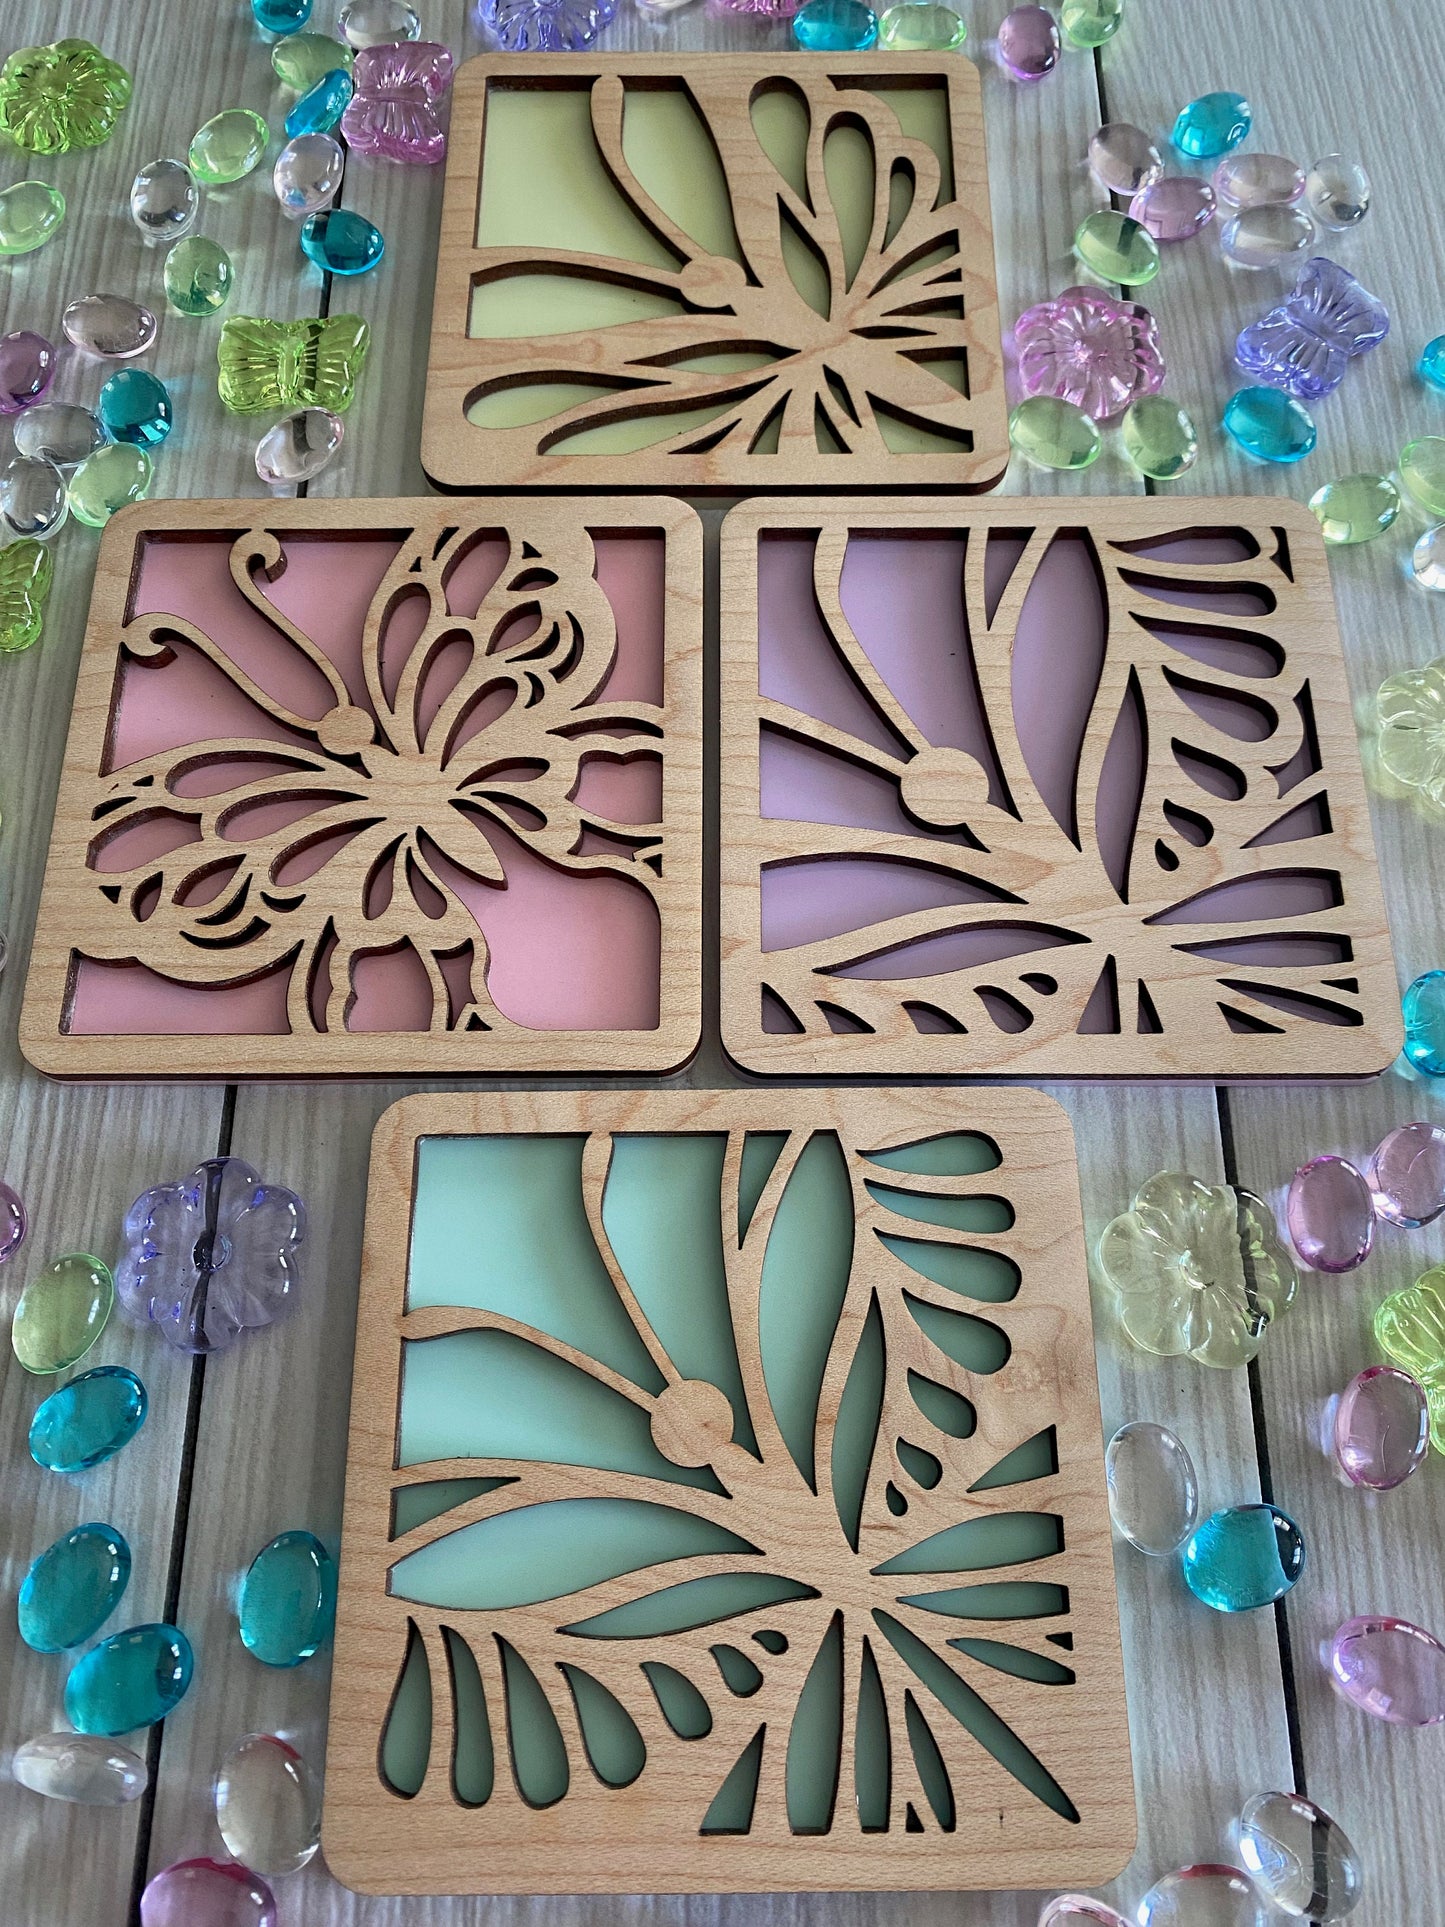 Butterfly coaster set - Colorful pastel coasters - Mother's Day gift set - Gifts for women - Springtime decor - Butterfly decor - Set of 4